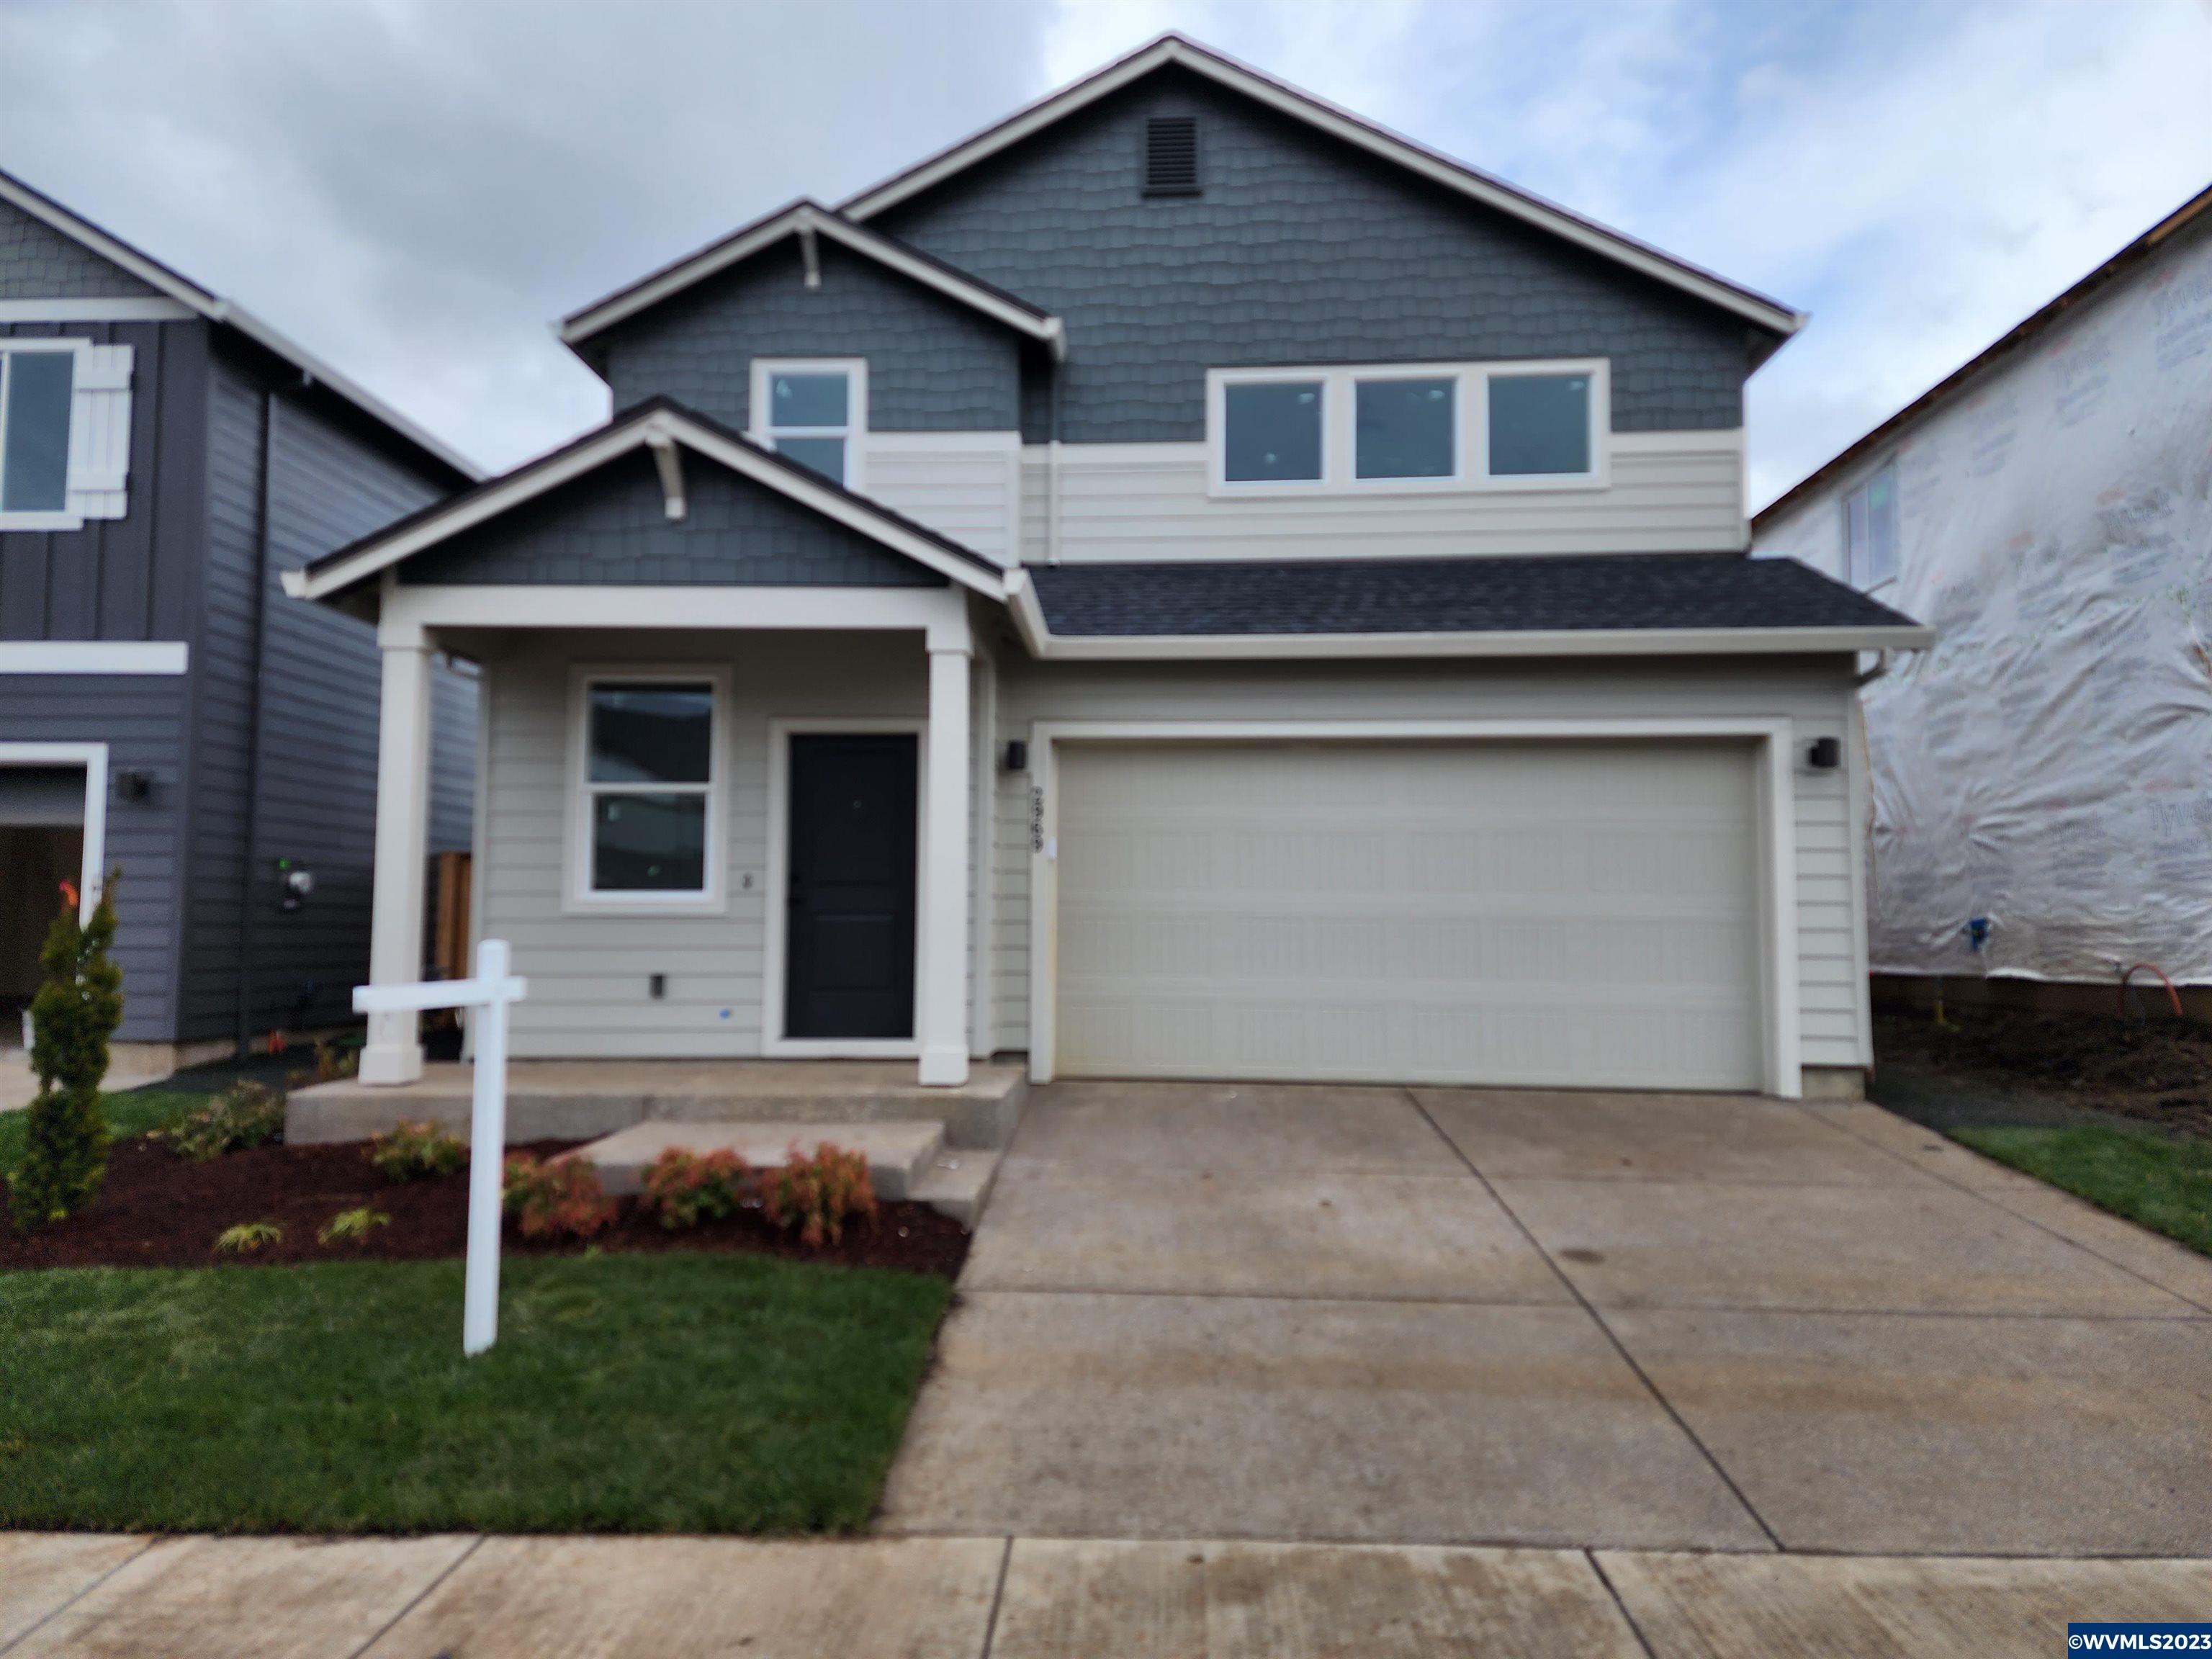 2969 NW COVEY Pl, Corvallis, OR 97330